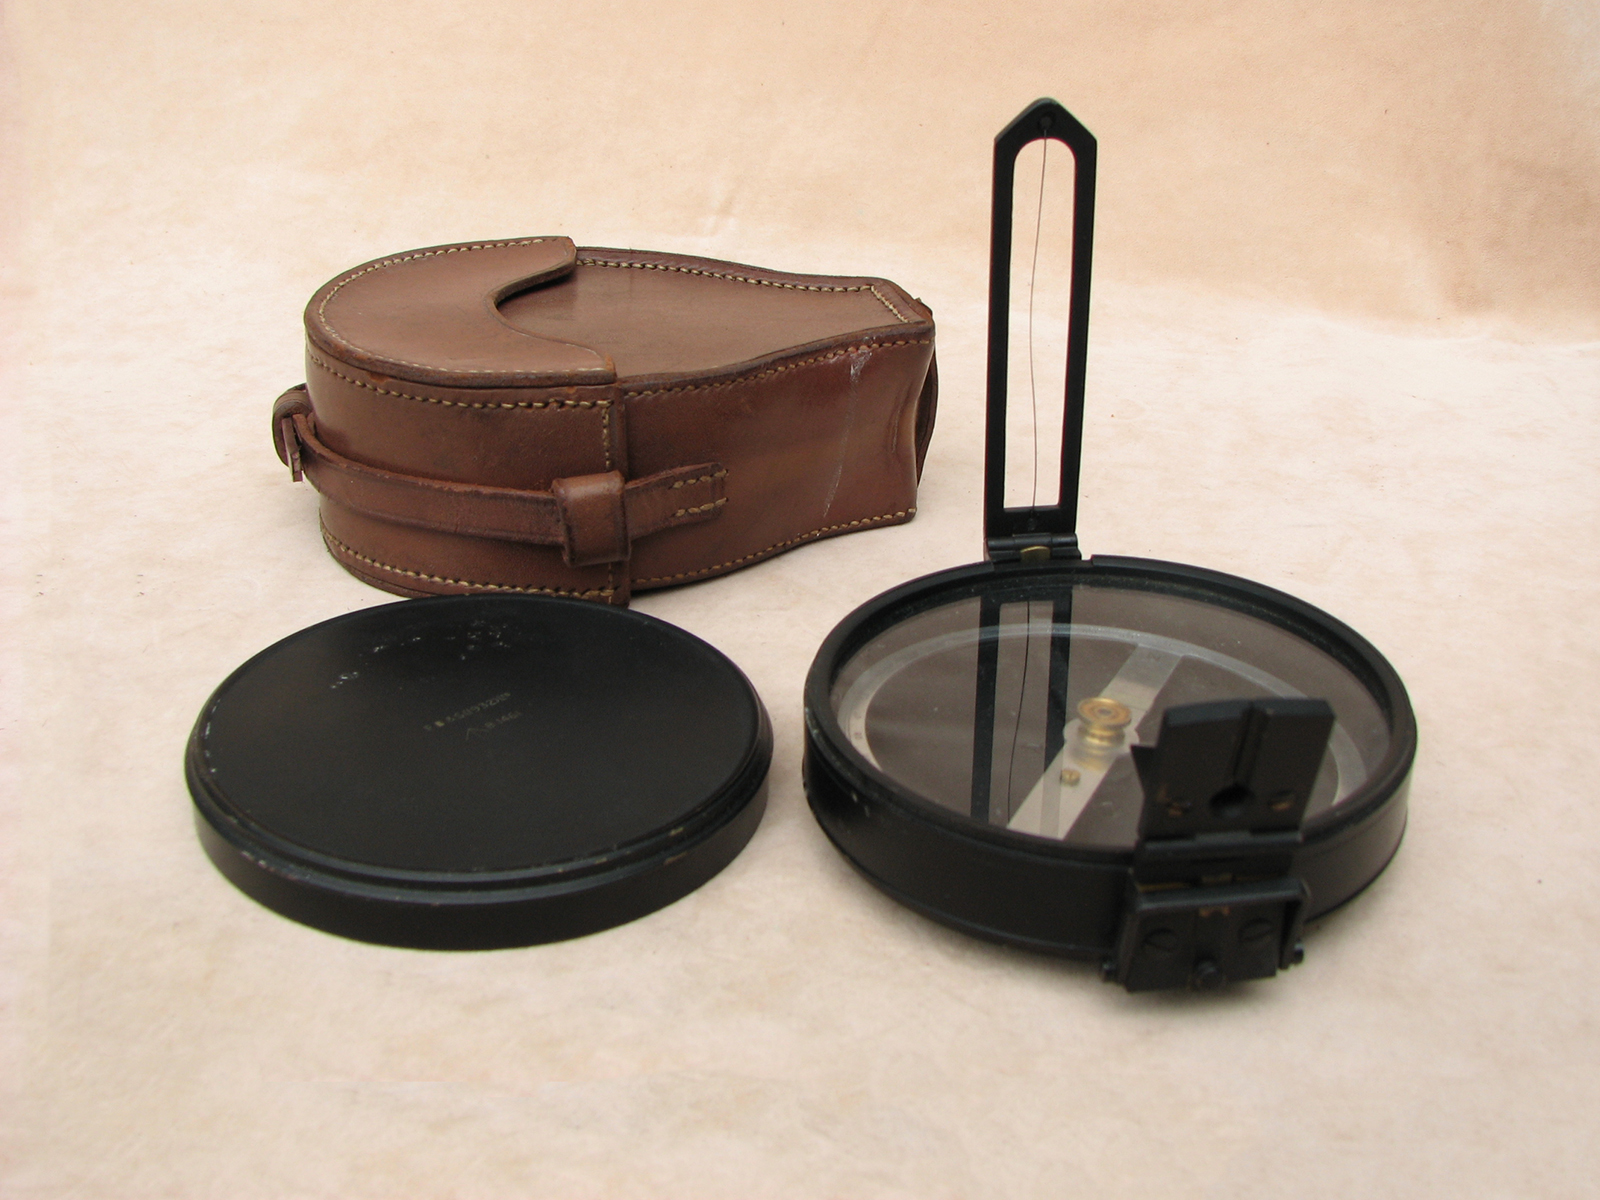 WW2 Francis Barker artillery compass with leather case.